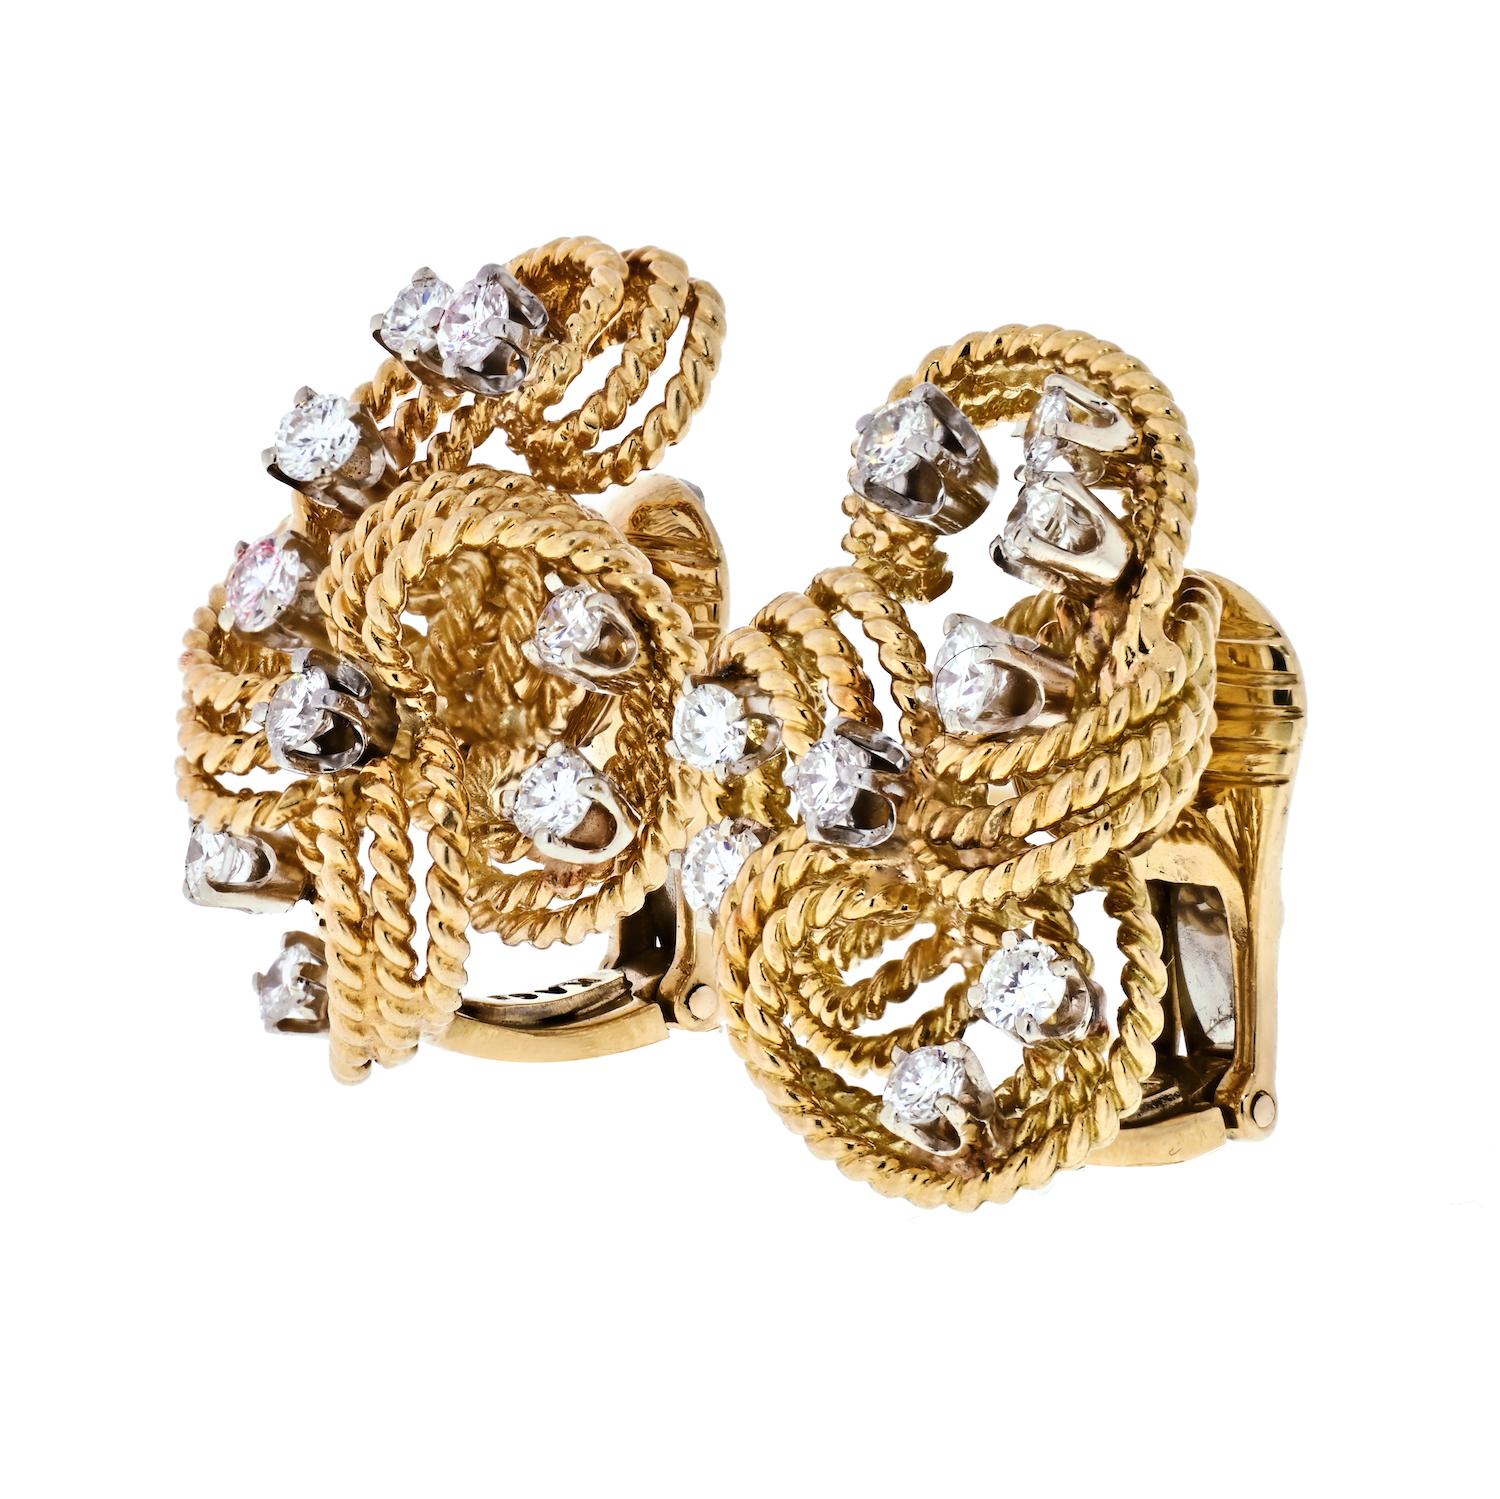 Elegant gold and diamond ear clips by David Webb. Each earring has 18 diamonds with a total weight of approximately 2.00 carats. They are surrounded by rows of twisted gold in a graceful, uplifting design.
Clip backs can be converted to posts.